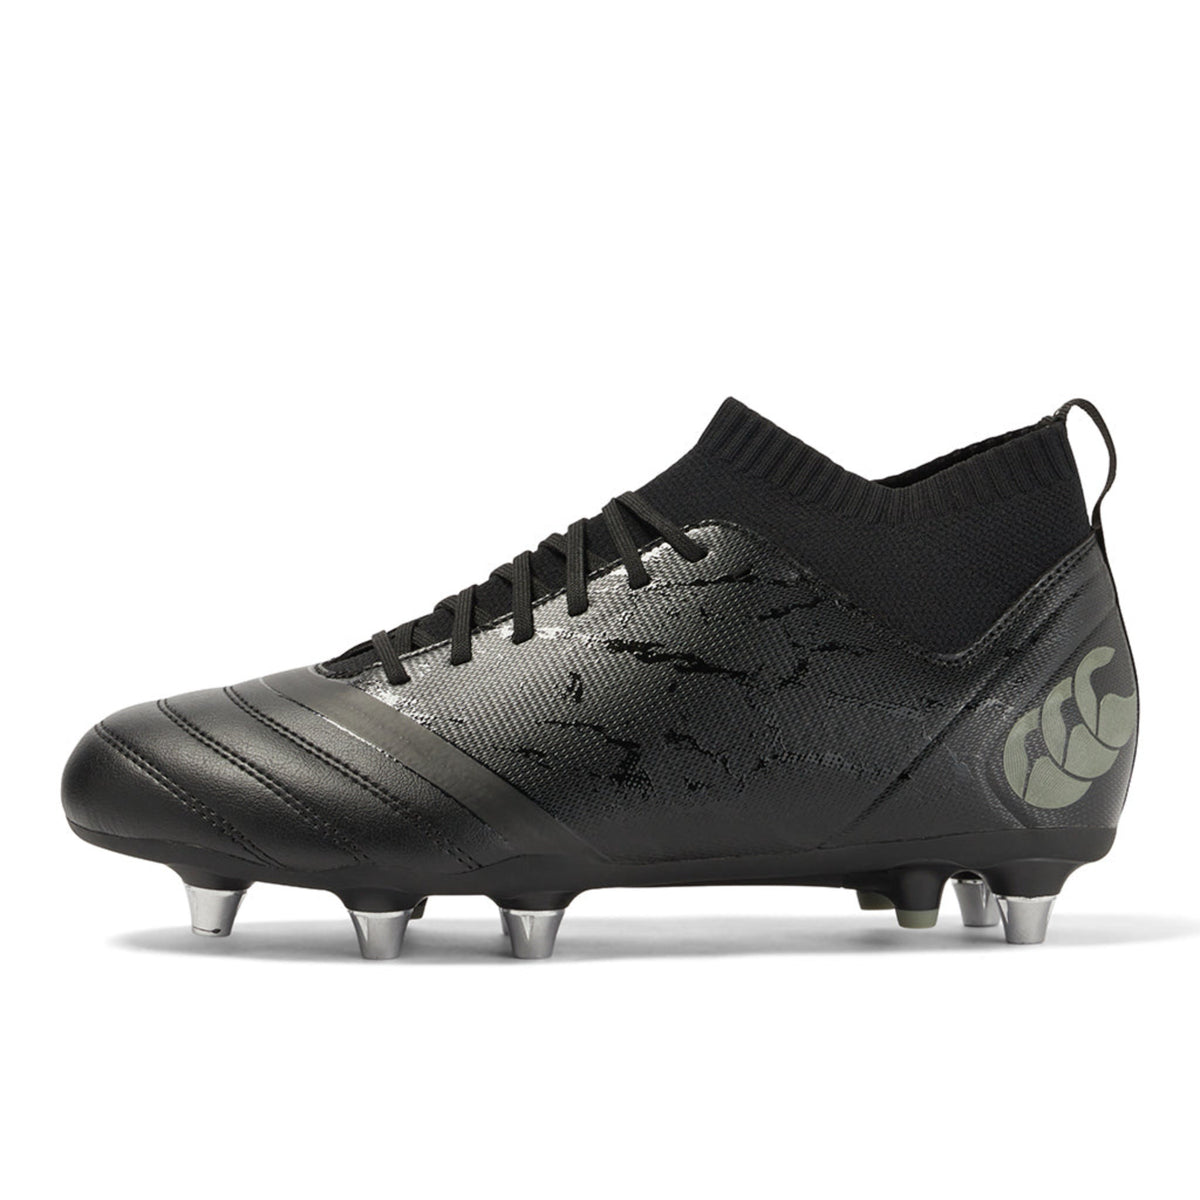 Canterbury Stampede Pro SG Rugby Boots a High-Performance Quality CCC Studed Rugby Shoe Black/Grey Available in Unisex Sizing 6-16